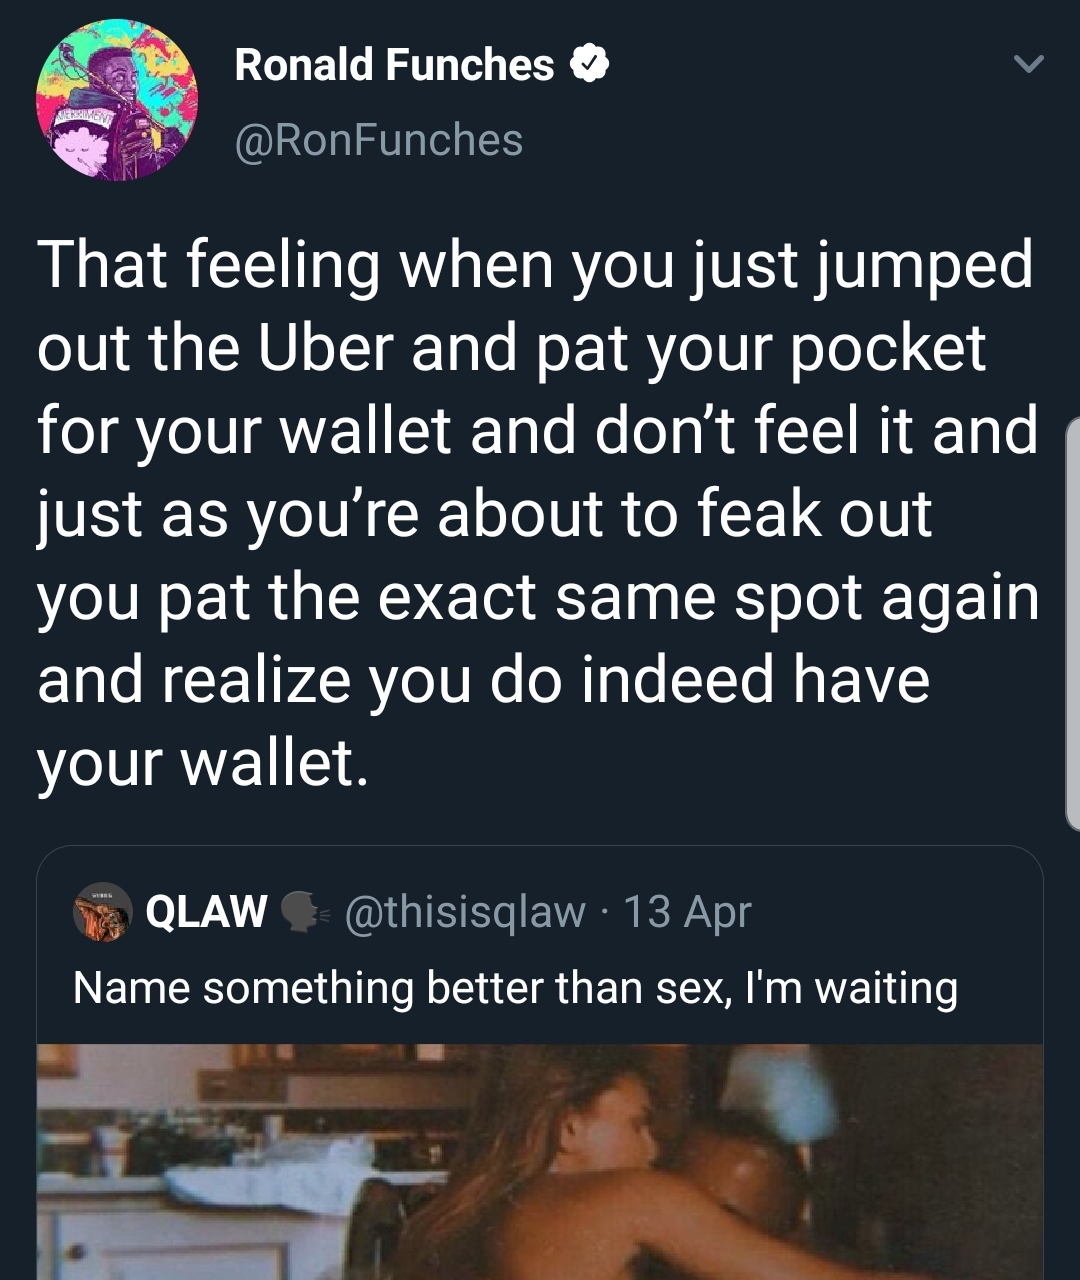 Ronald Funches That feeling when you just jumped out the Uber and pat your pocket for your wallet and don't feel it and just as you're about to feak out you pat the exact same spot again and realize you do indeed have your wallet.